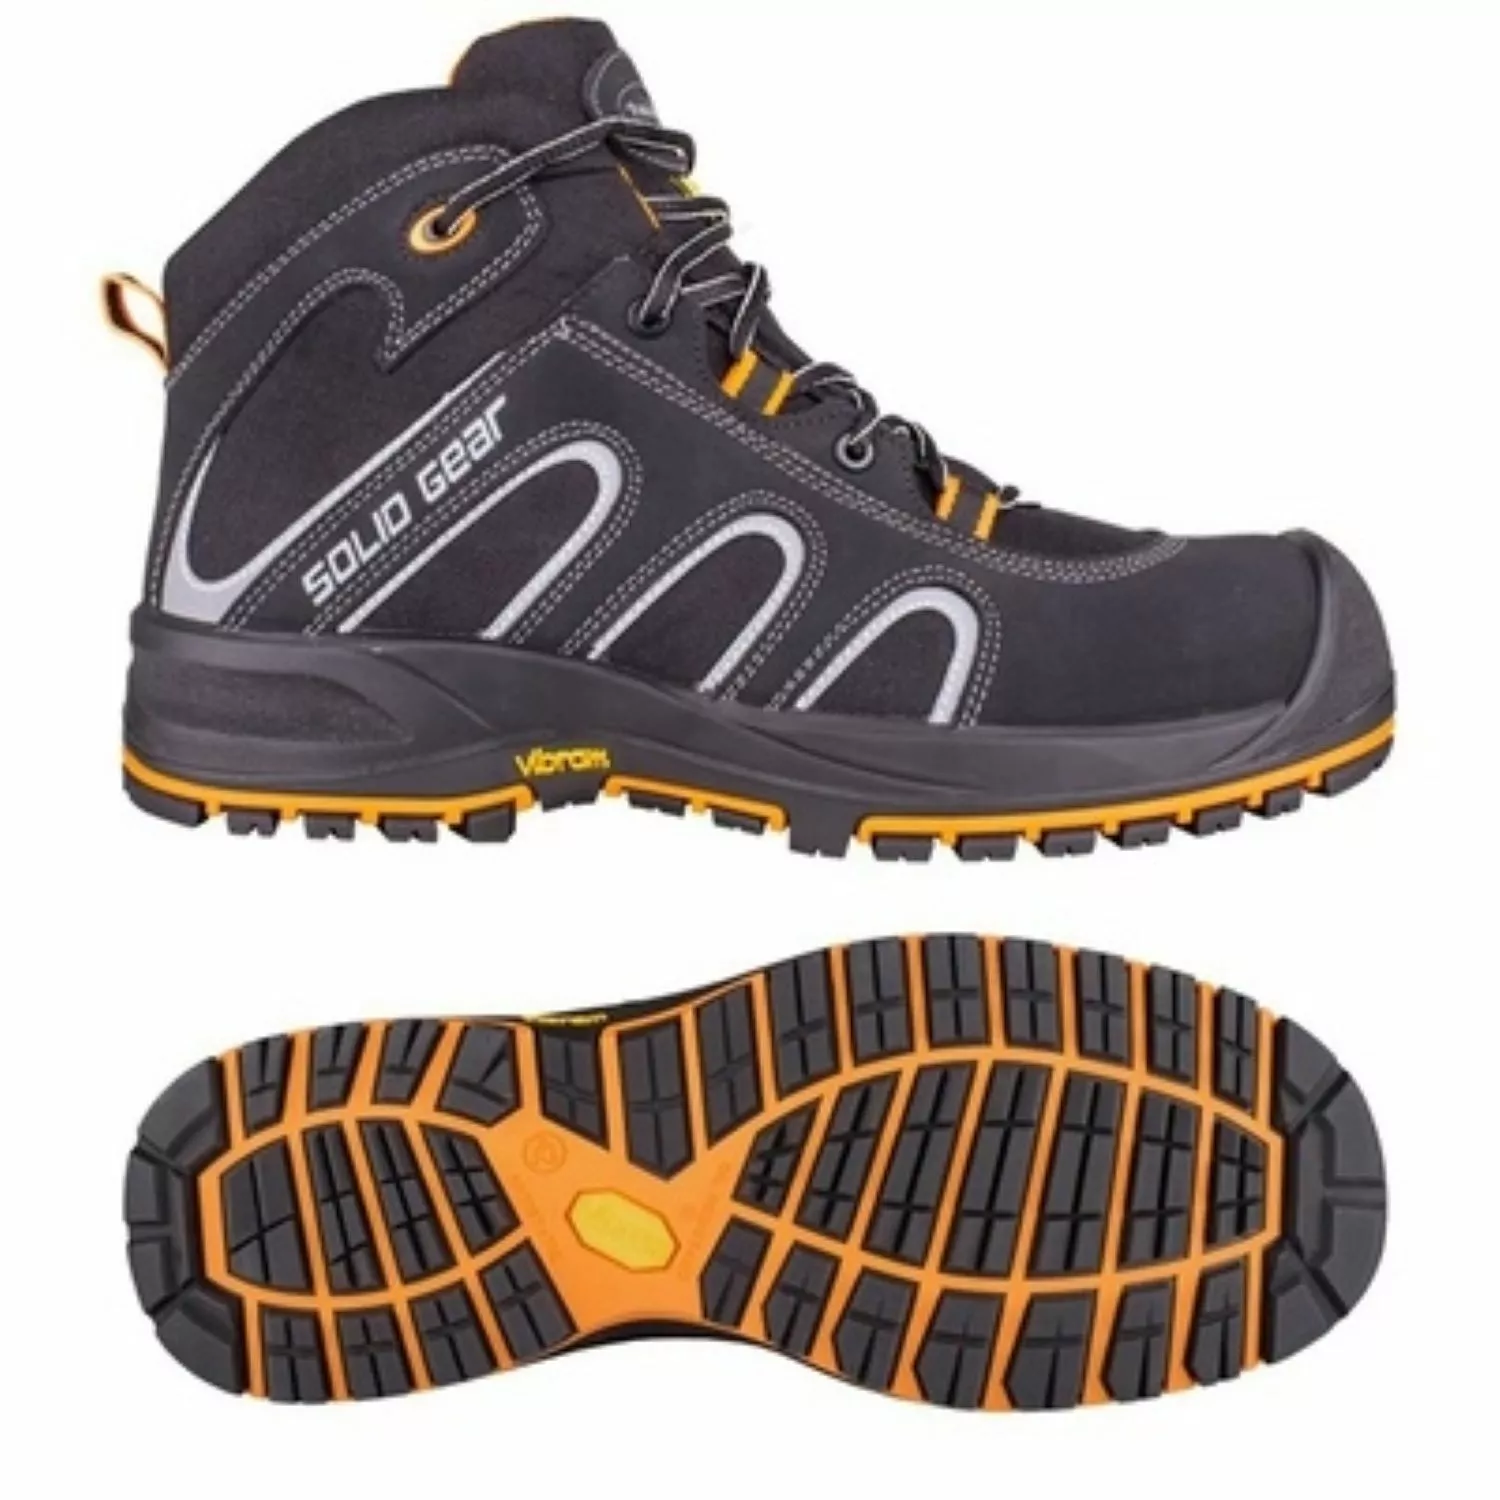 Solid Gear 73002 Falcon chaussure de travail - taille 42-image